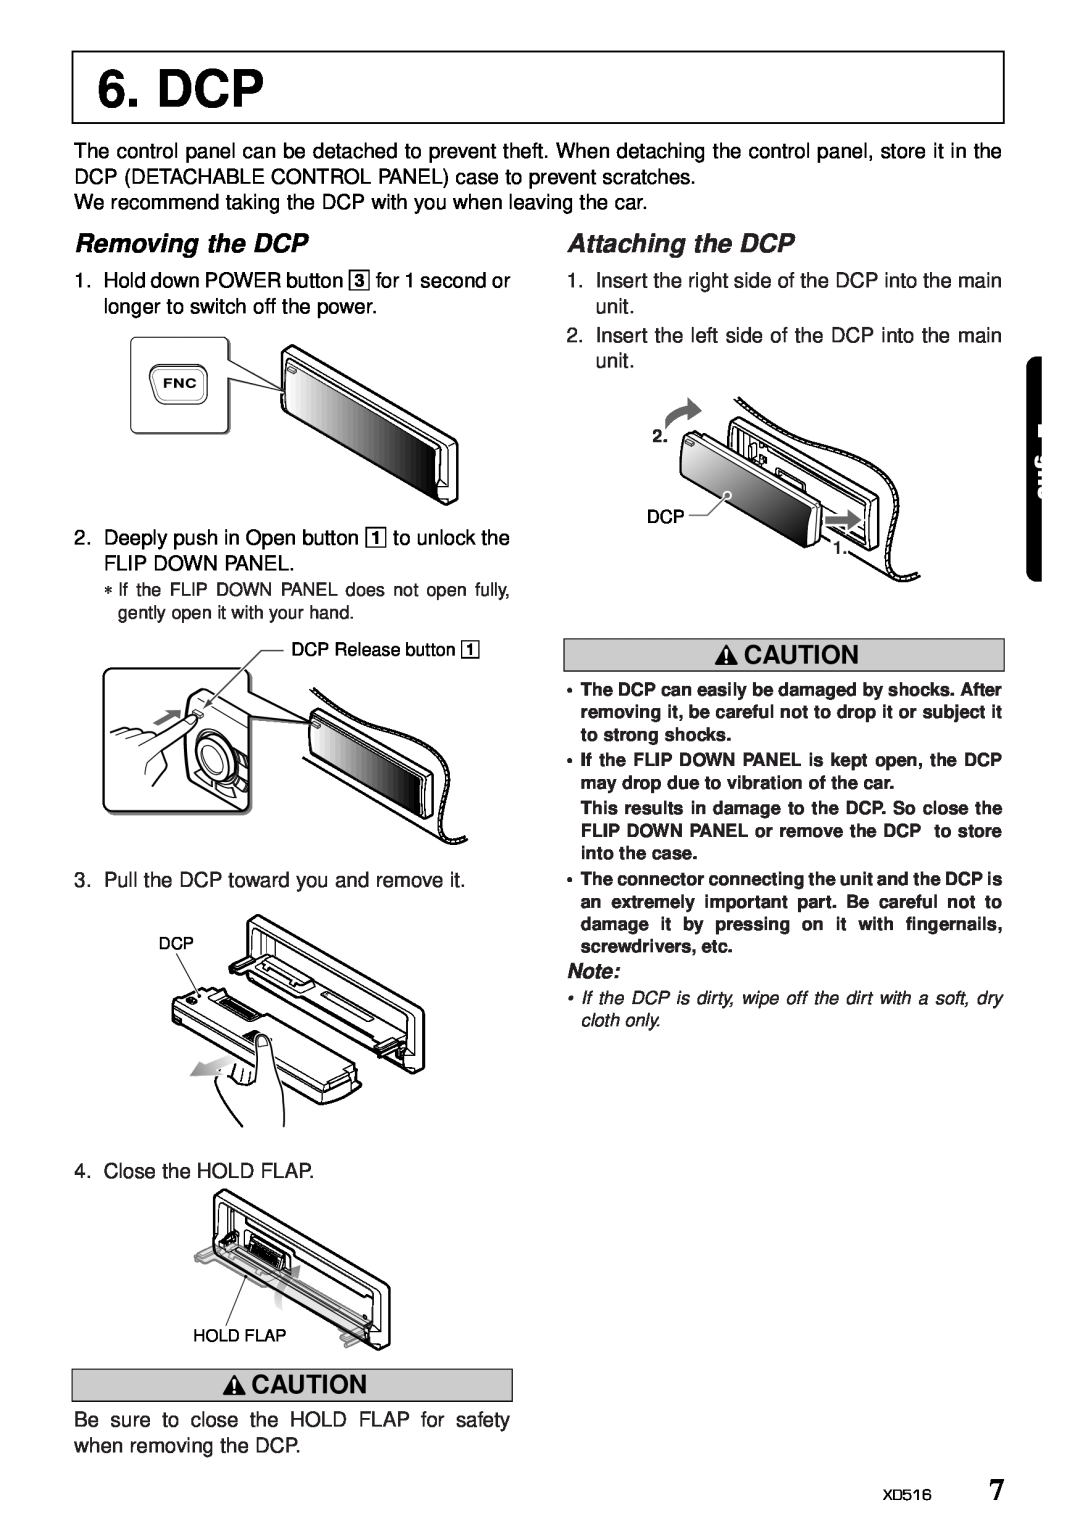 Clarion XD516 owner manual Dcp, Removing the DCP, Attaching the DCP 